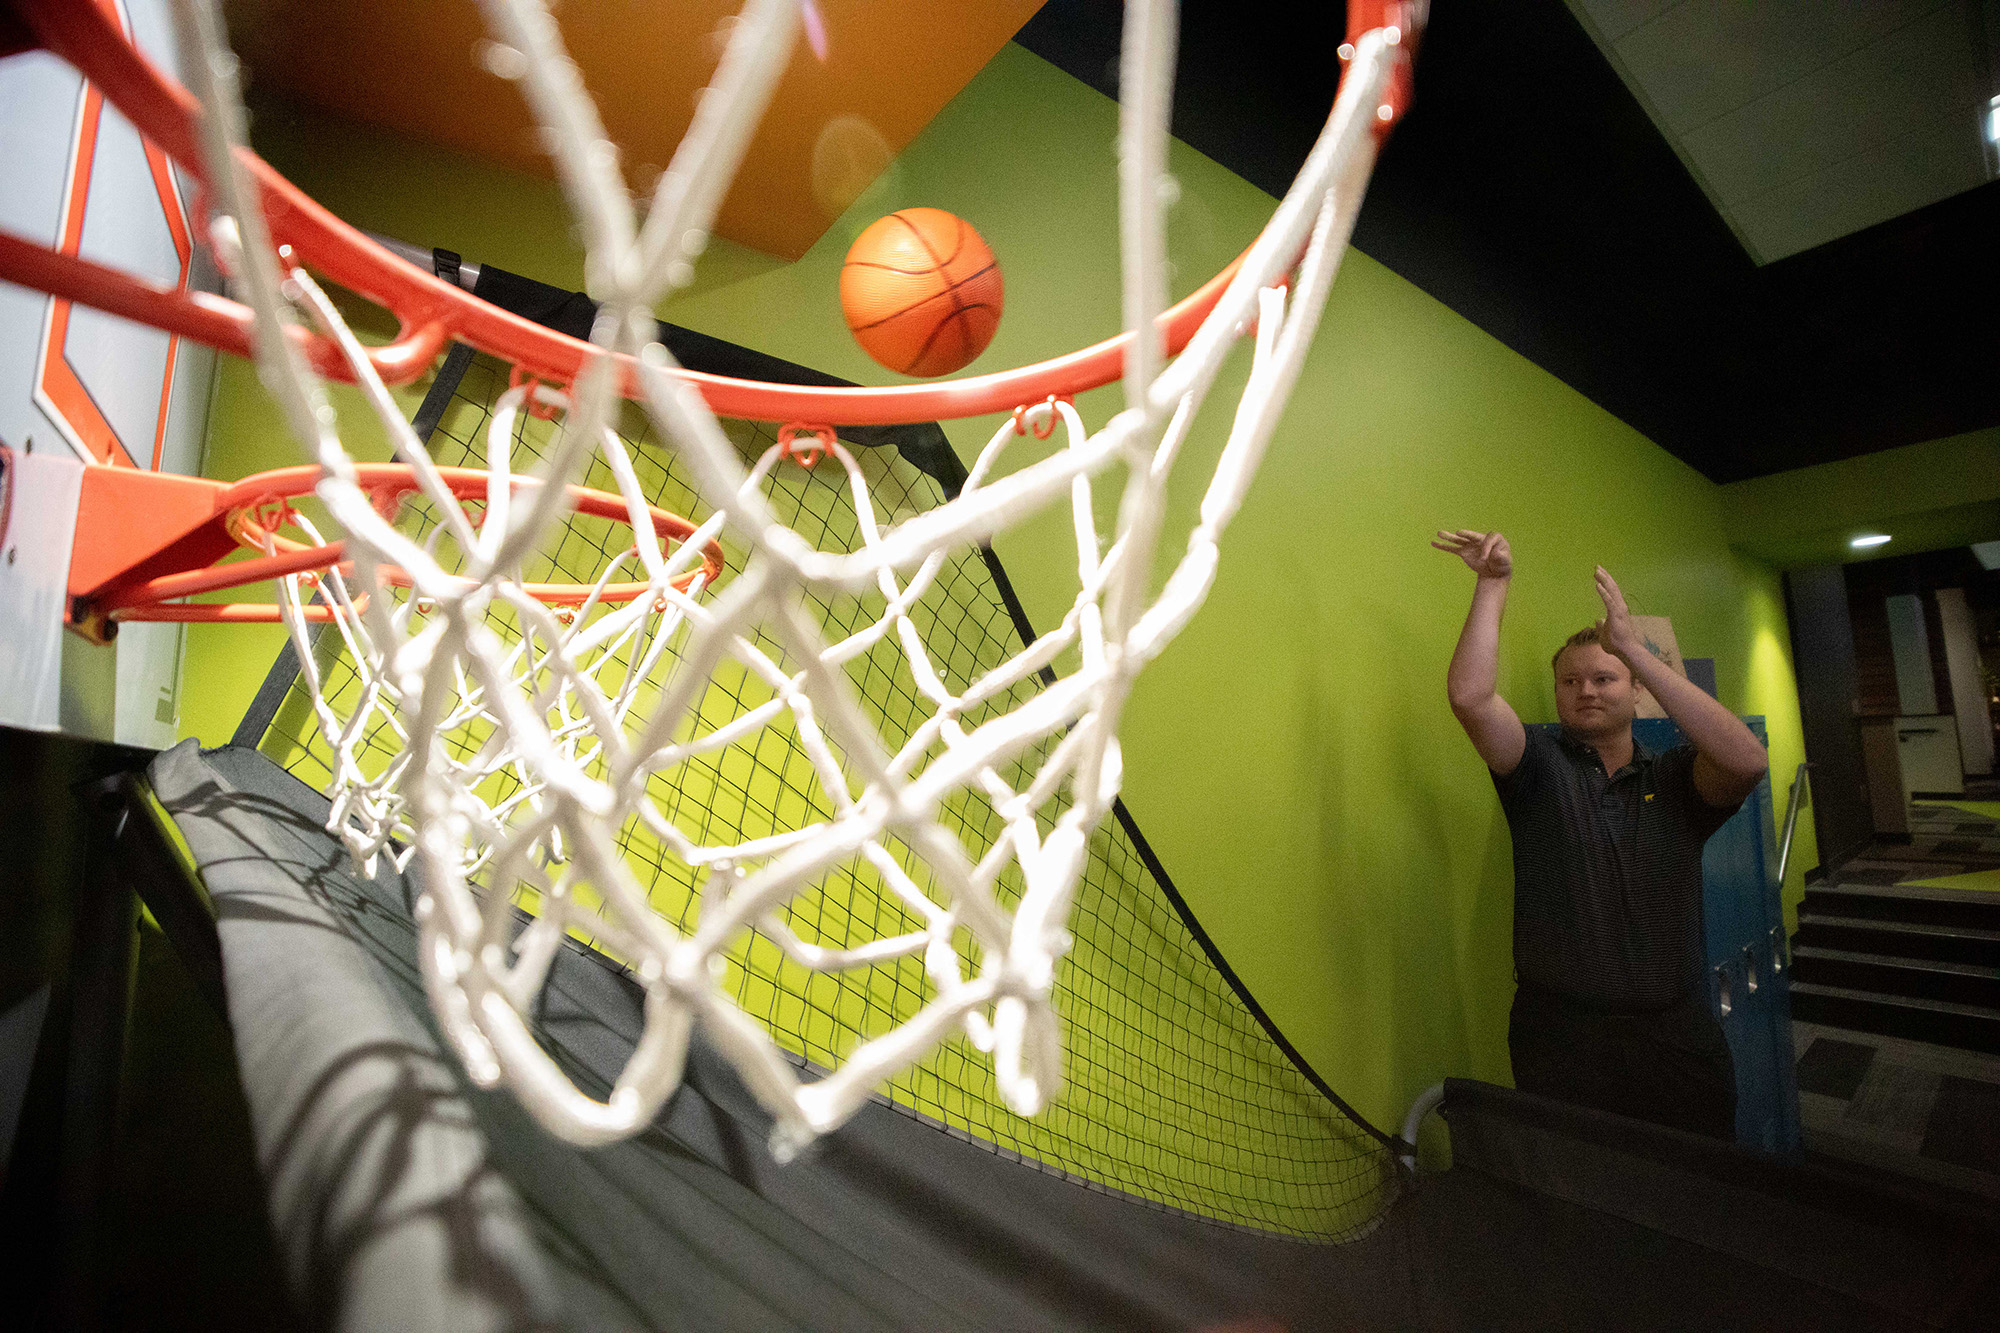 Shooting hoops in the Epicosity office.